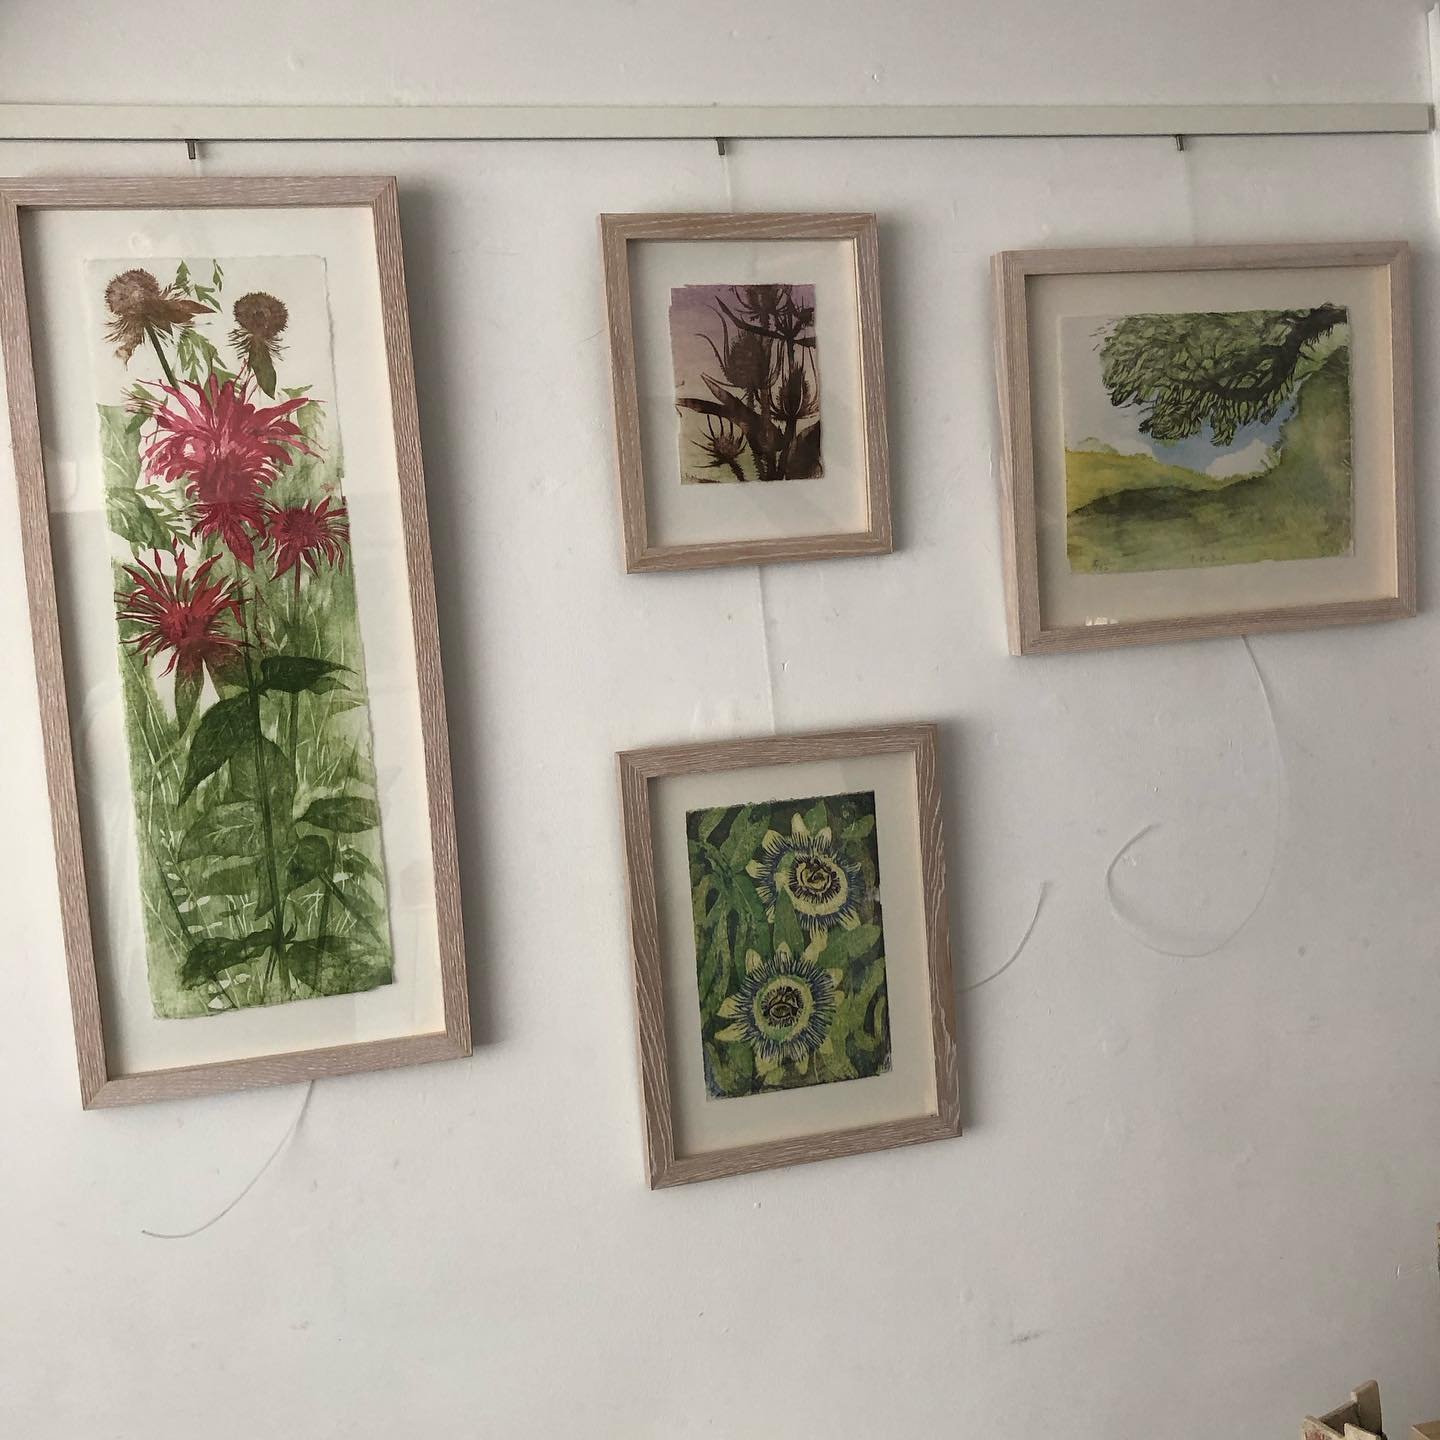 Just finished setting up at the Weavers Gallery in Ledbury where six local women artists are showing their skilful work - we&rsquo;re open 10 til 4 for the next week and would love to see you! @catherinevangiap  @sadiemademe @hideandfleece @elainefow